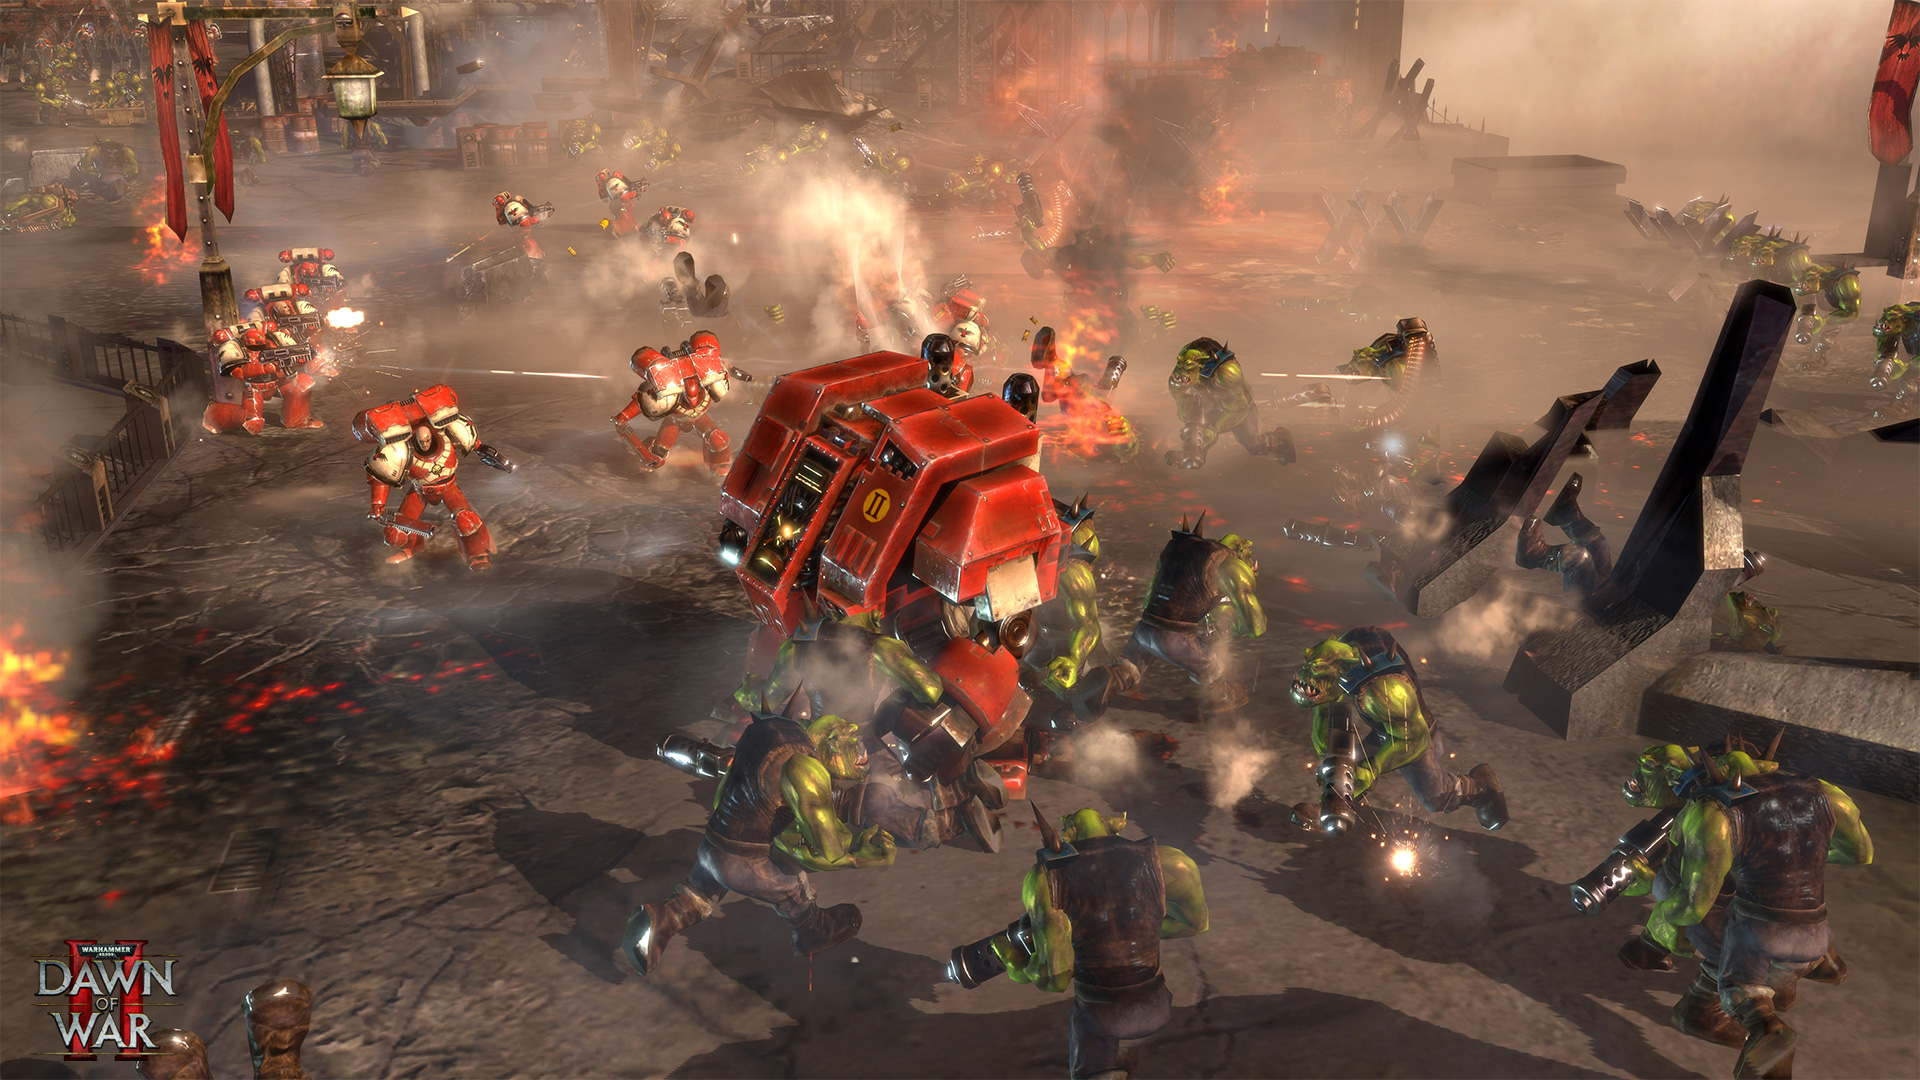 Space Marines fight some Orks.